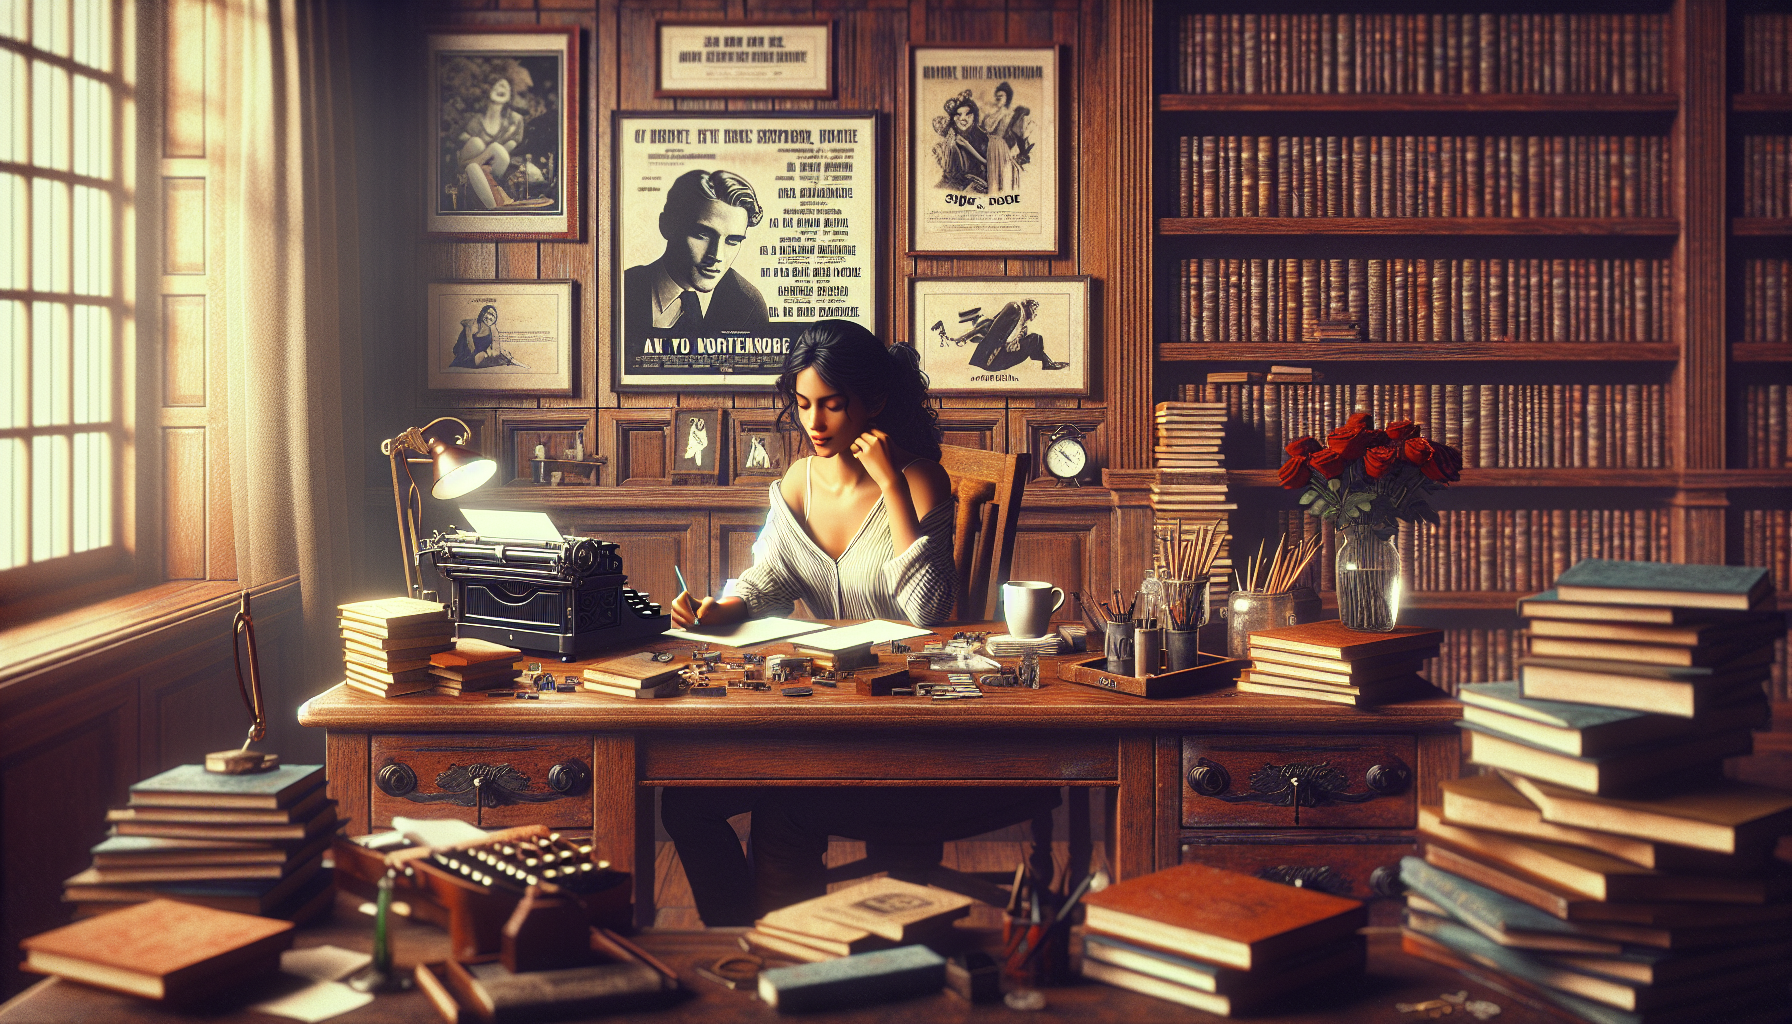 Create an image of a vintage, wood-paneled library with a young woman seated at a large oak desk, bathed in soft light from a nearby window. She is surrounded by stacks of books and film scripts, inte